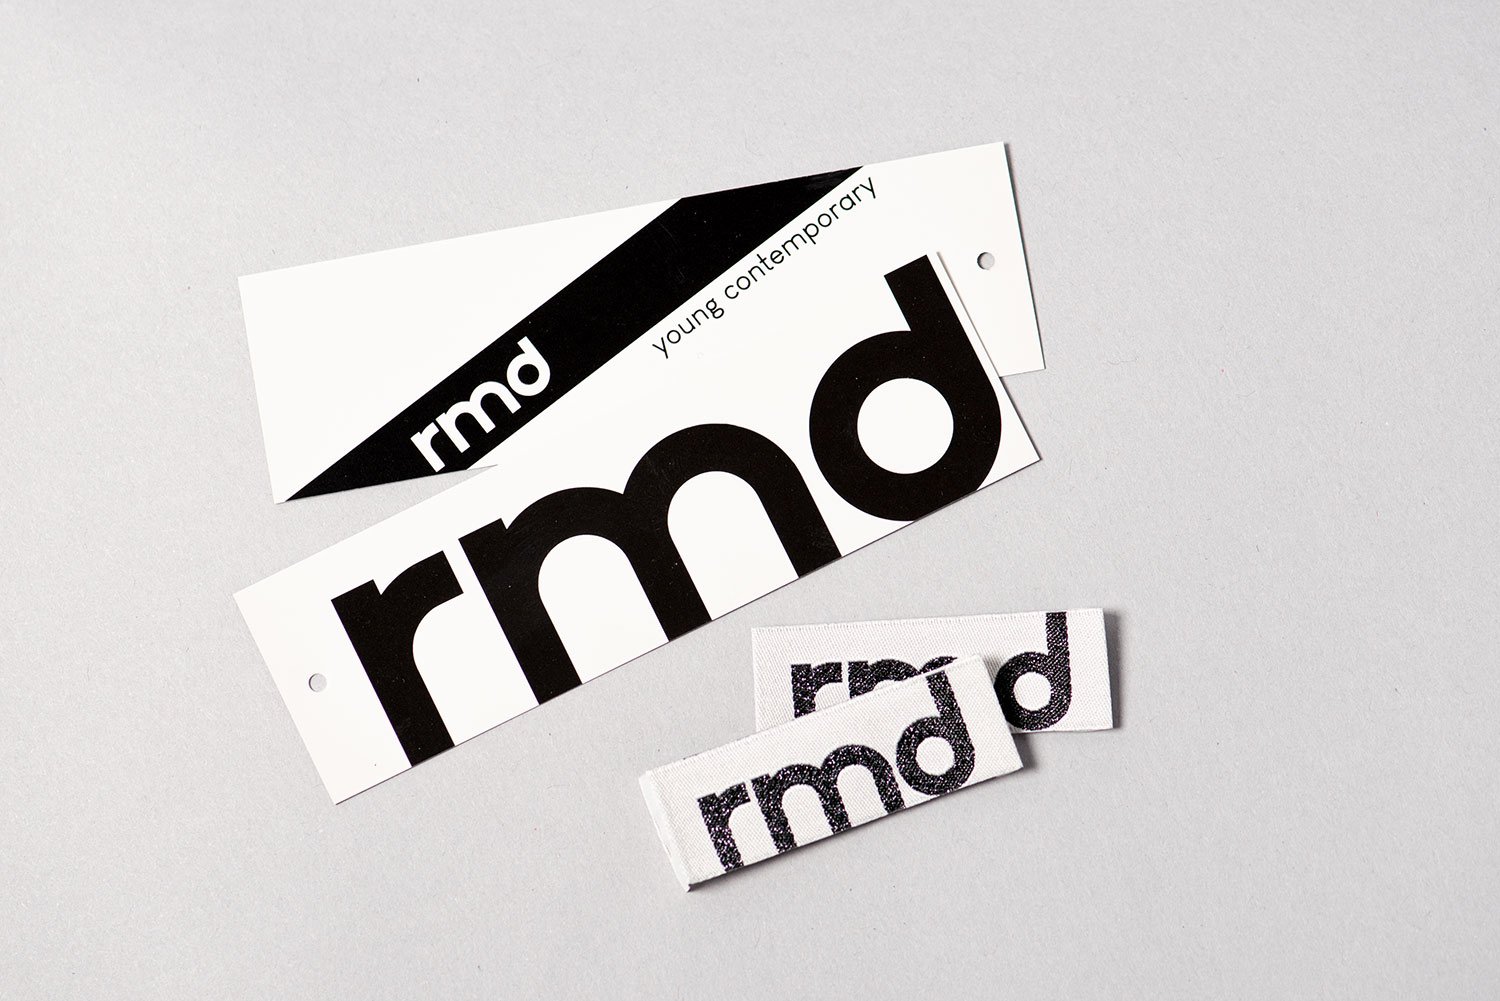 RMD Hang Tag & Woven Label for Ross Stores